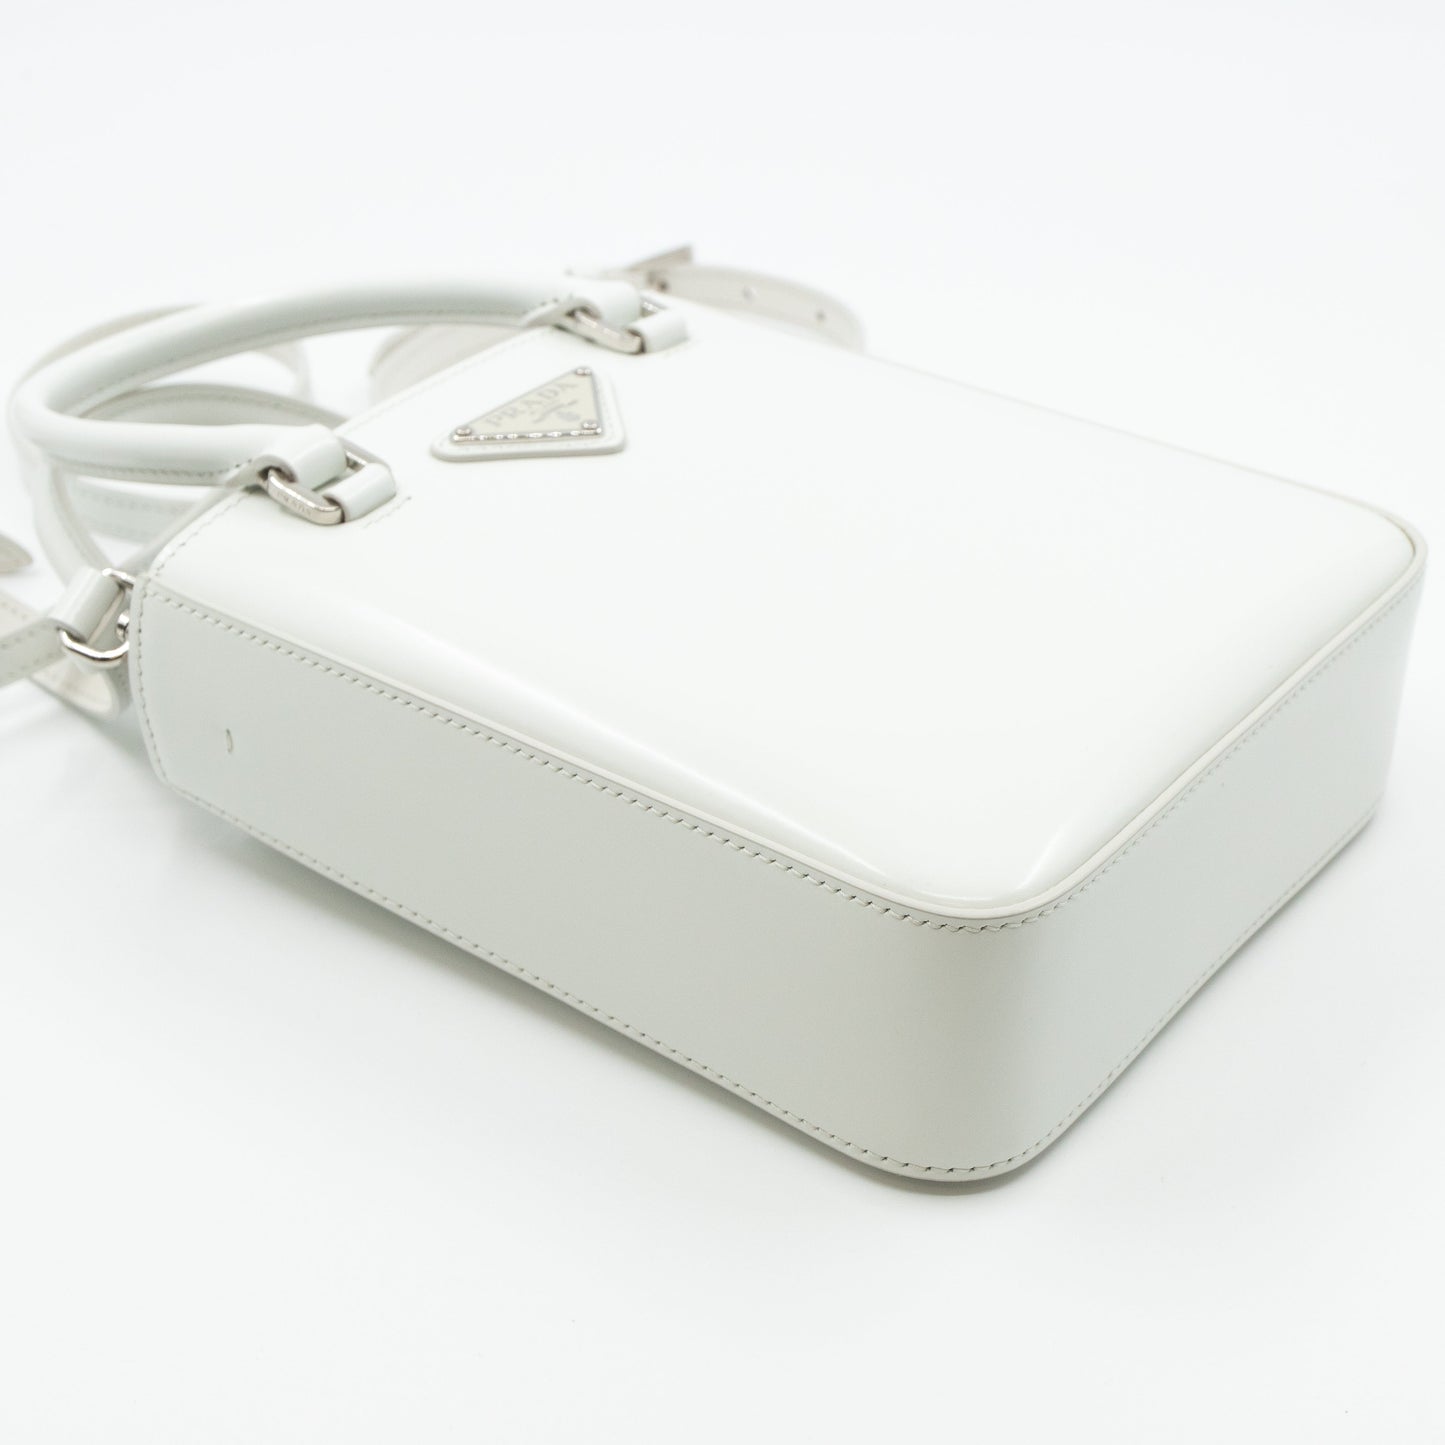 Small Crossbody Tote White Brushed Leather